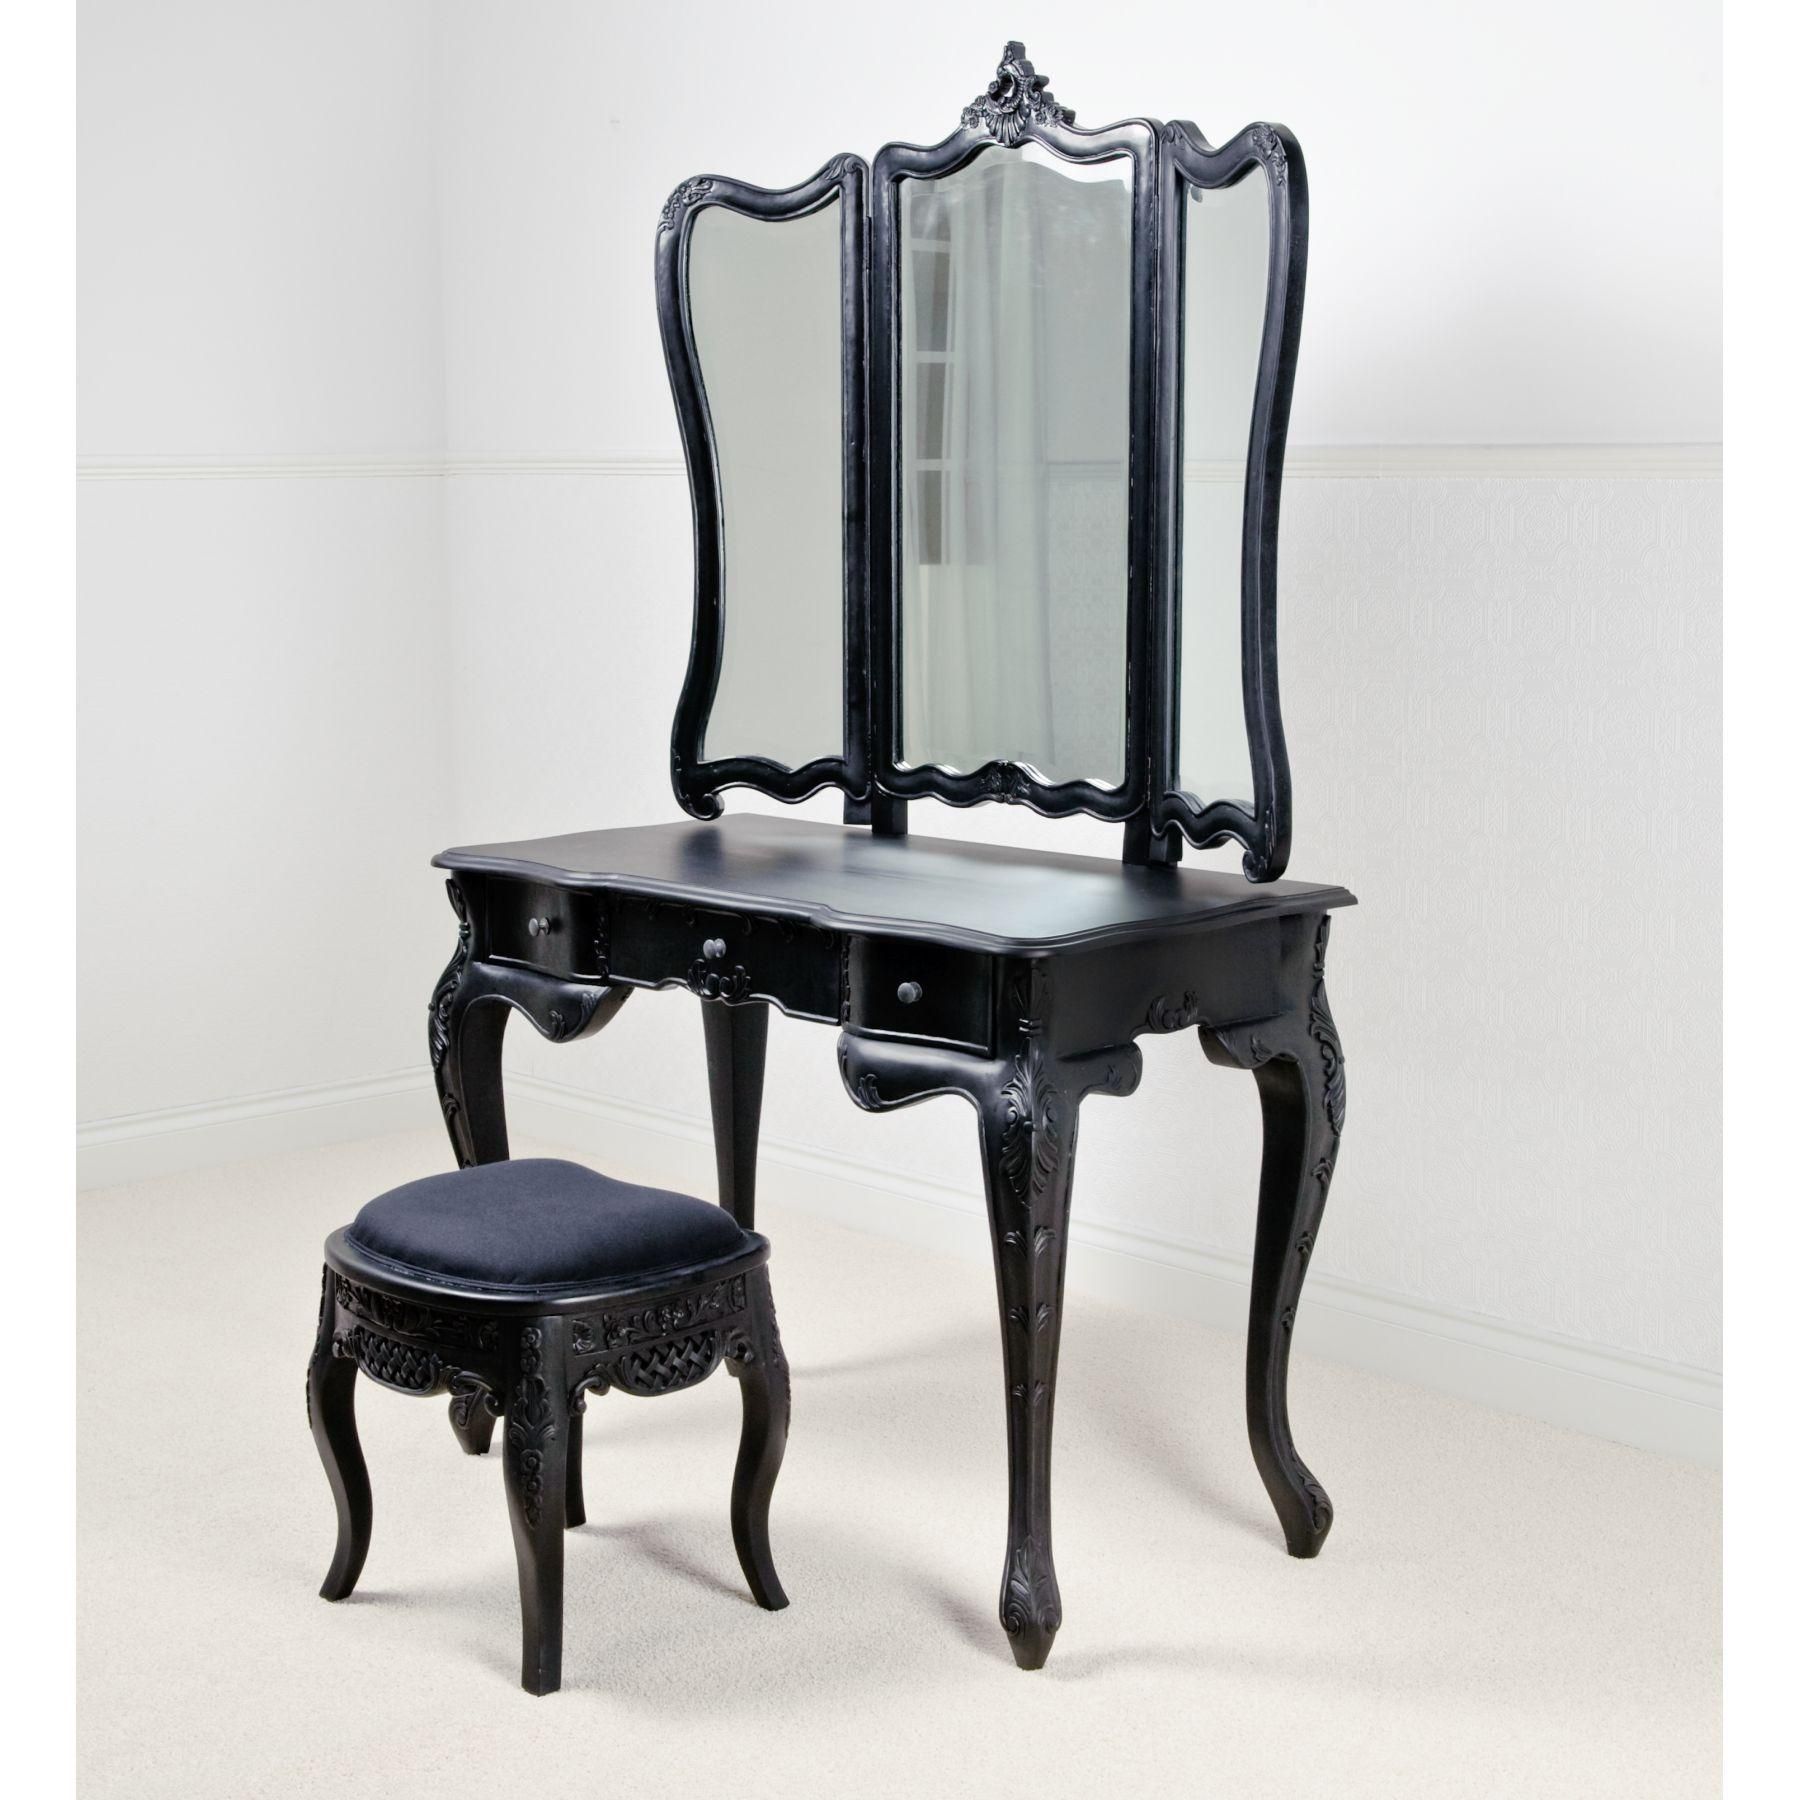 Bedroom Furniture Sets : Dressing Table Black Vanity Desk With Intended For Black Dressing Mirror (View 8 of 20)